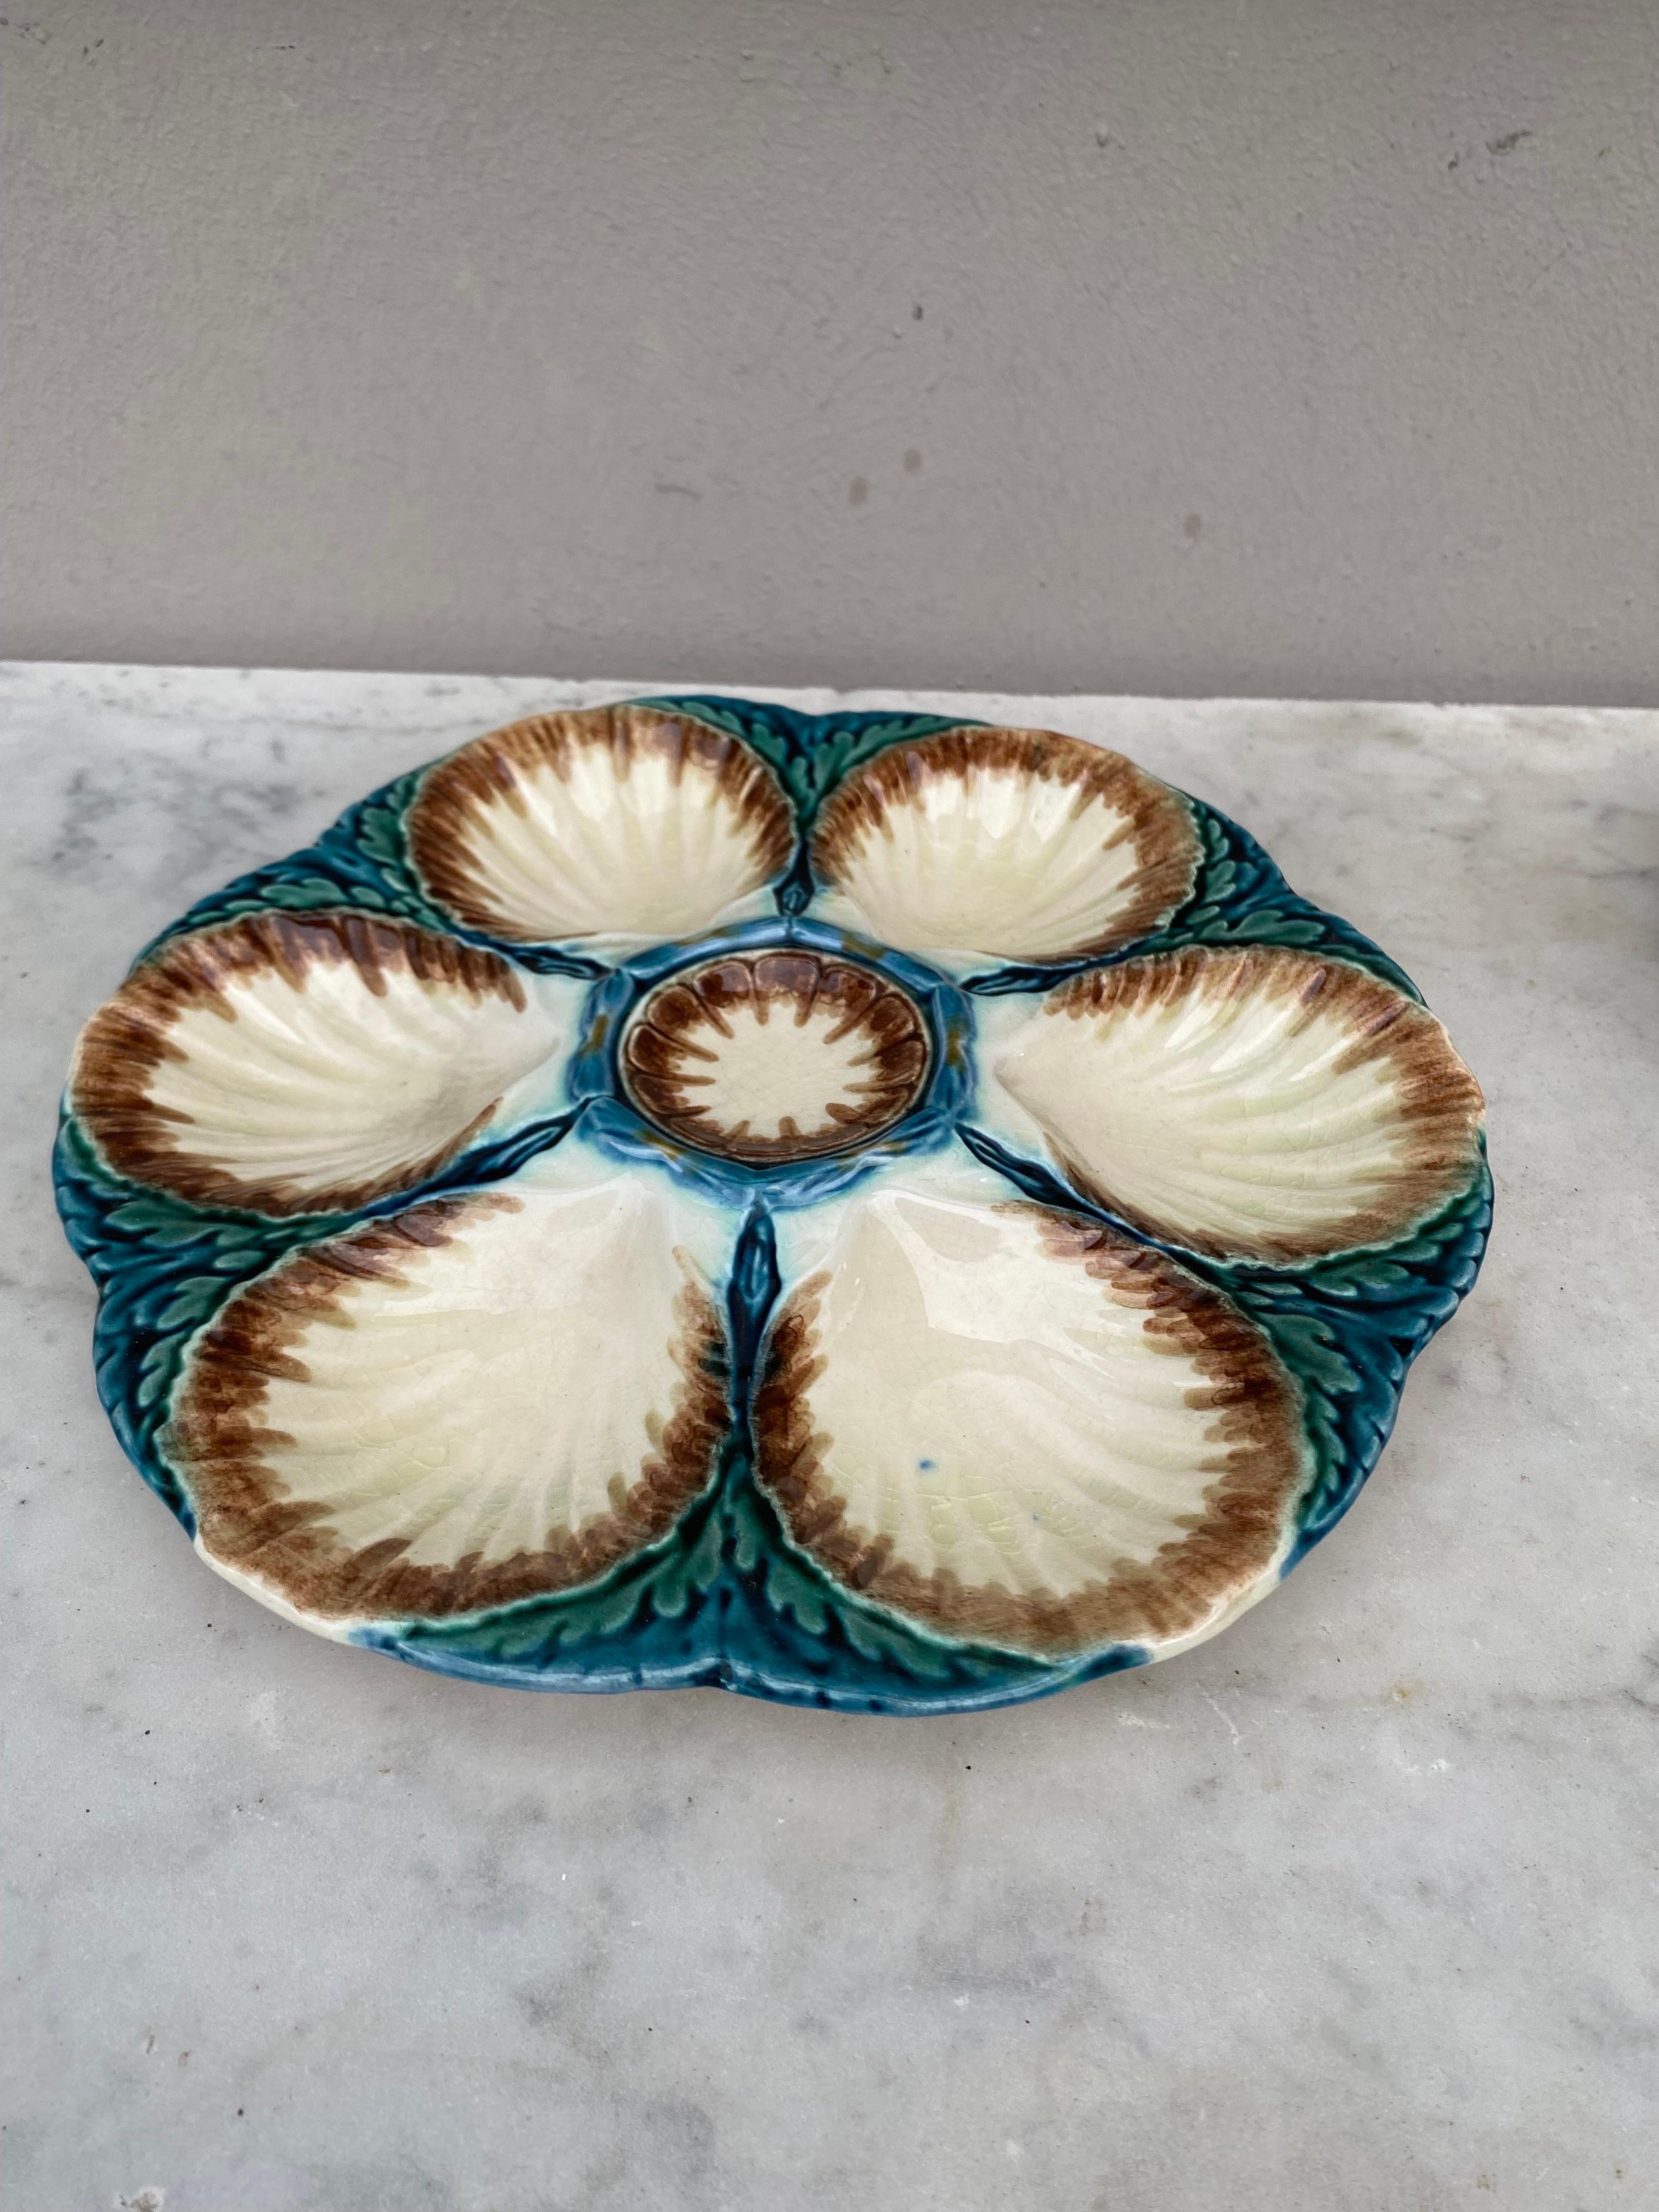 Majolica oyster plate Sarreguemines, circa 1870.
6 shells and space for the lemon on the center.
Older model.